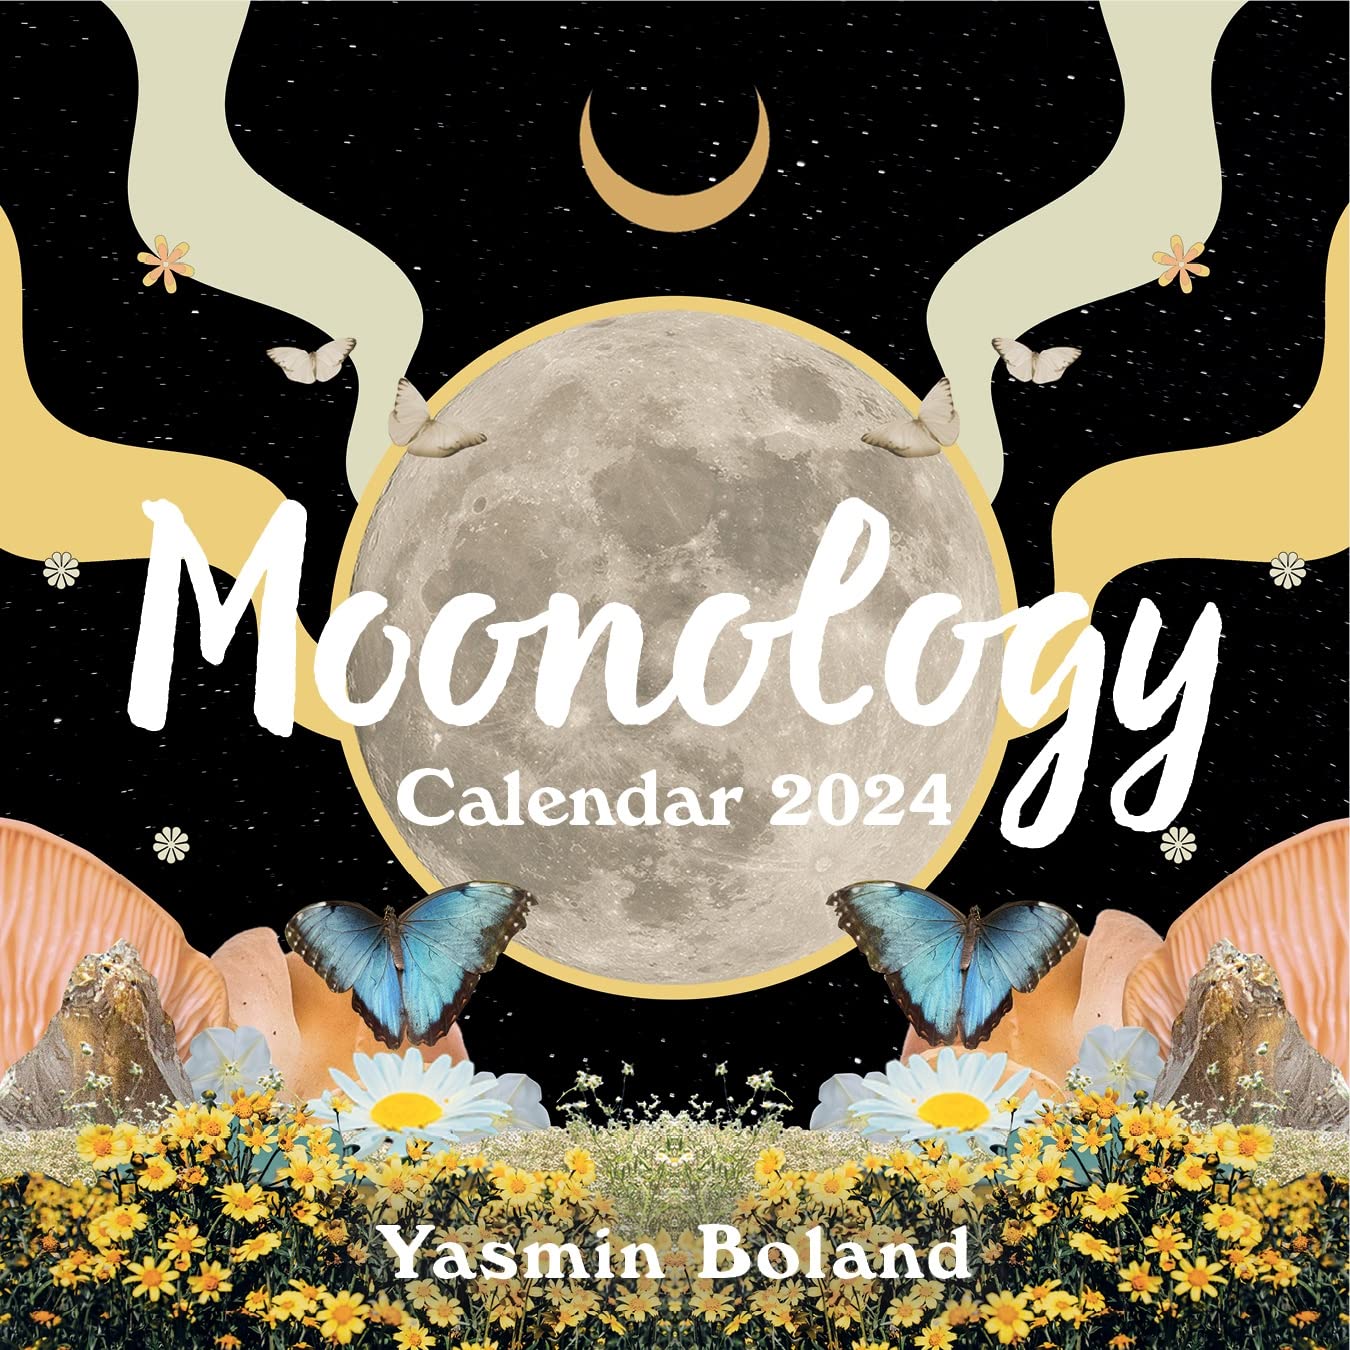 Preorder Moonology Messages Deck at a great price + new releases! - Magick  Planet